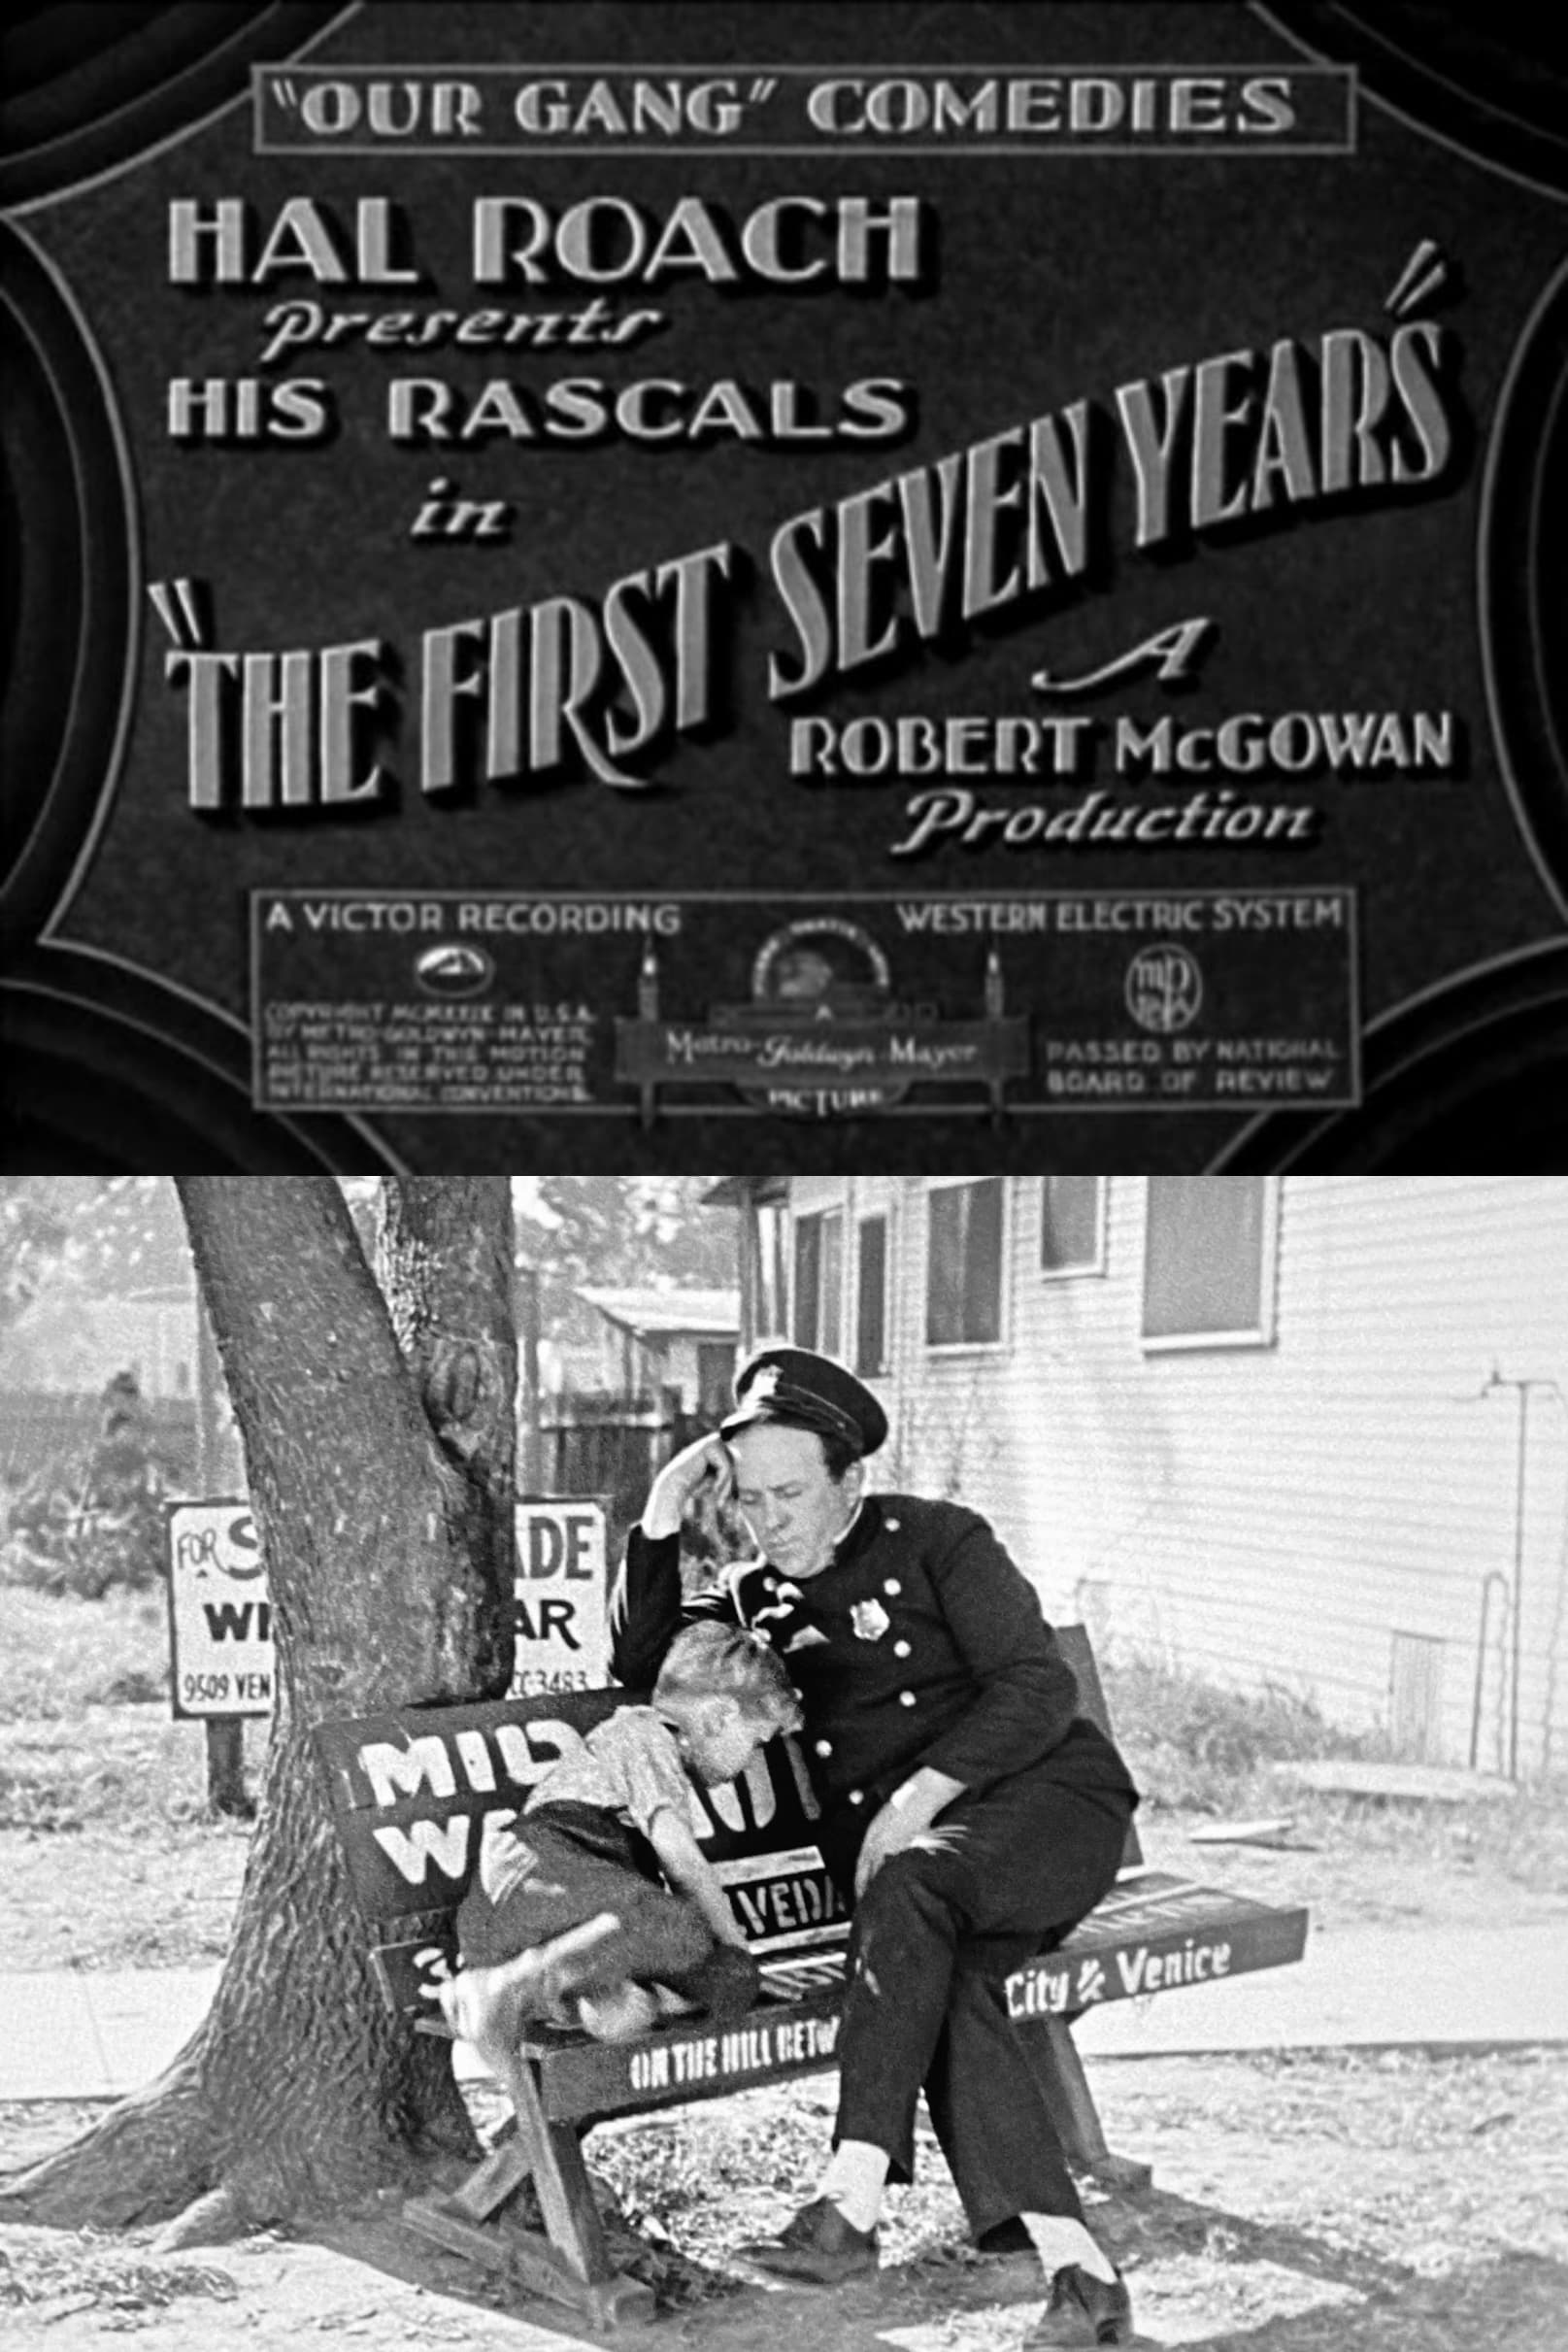 The First Seven Years (1930)